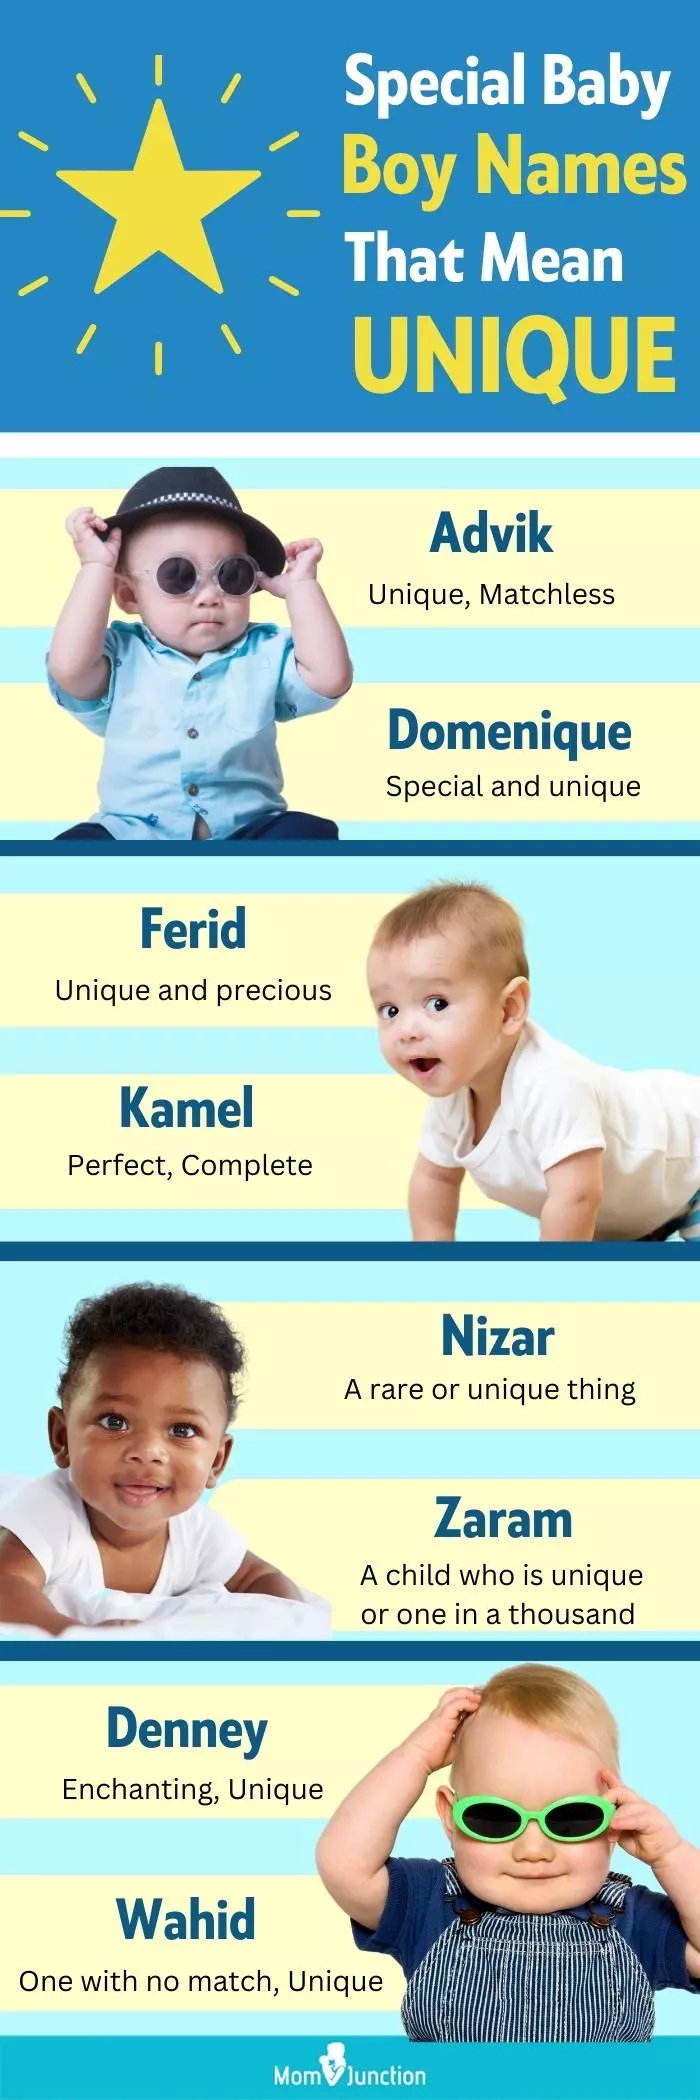 special baby boy names that mean unique (infographic)